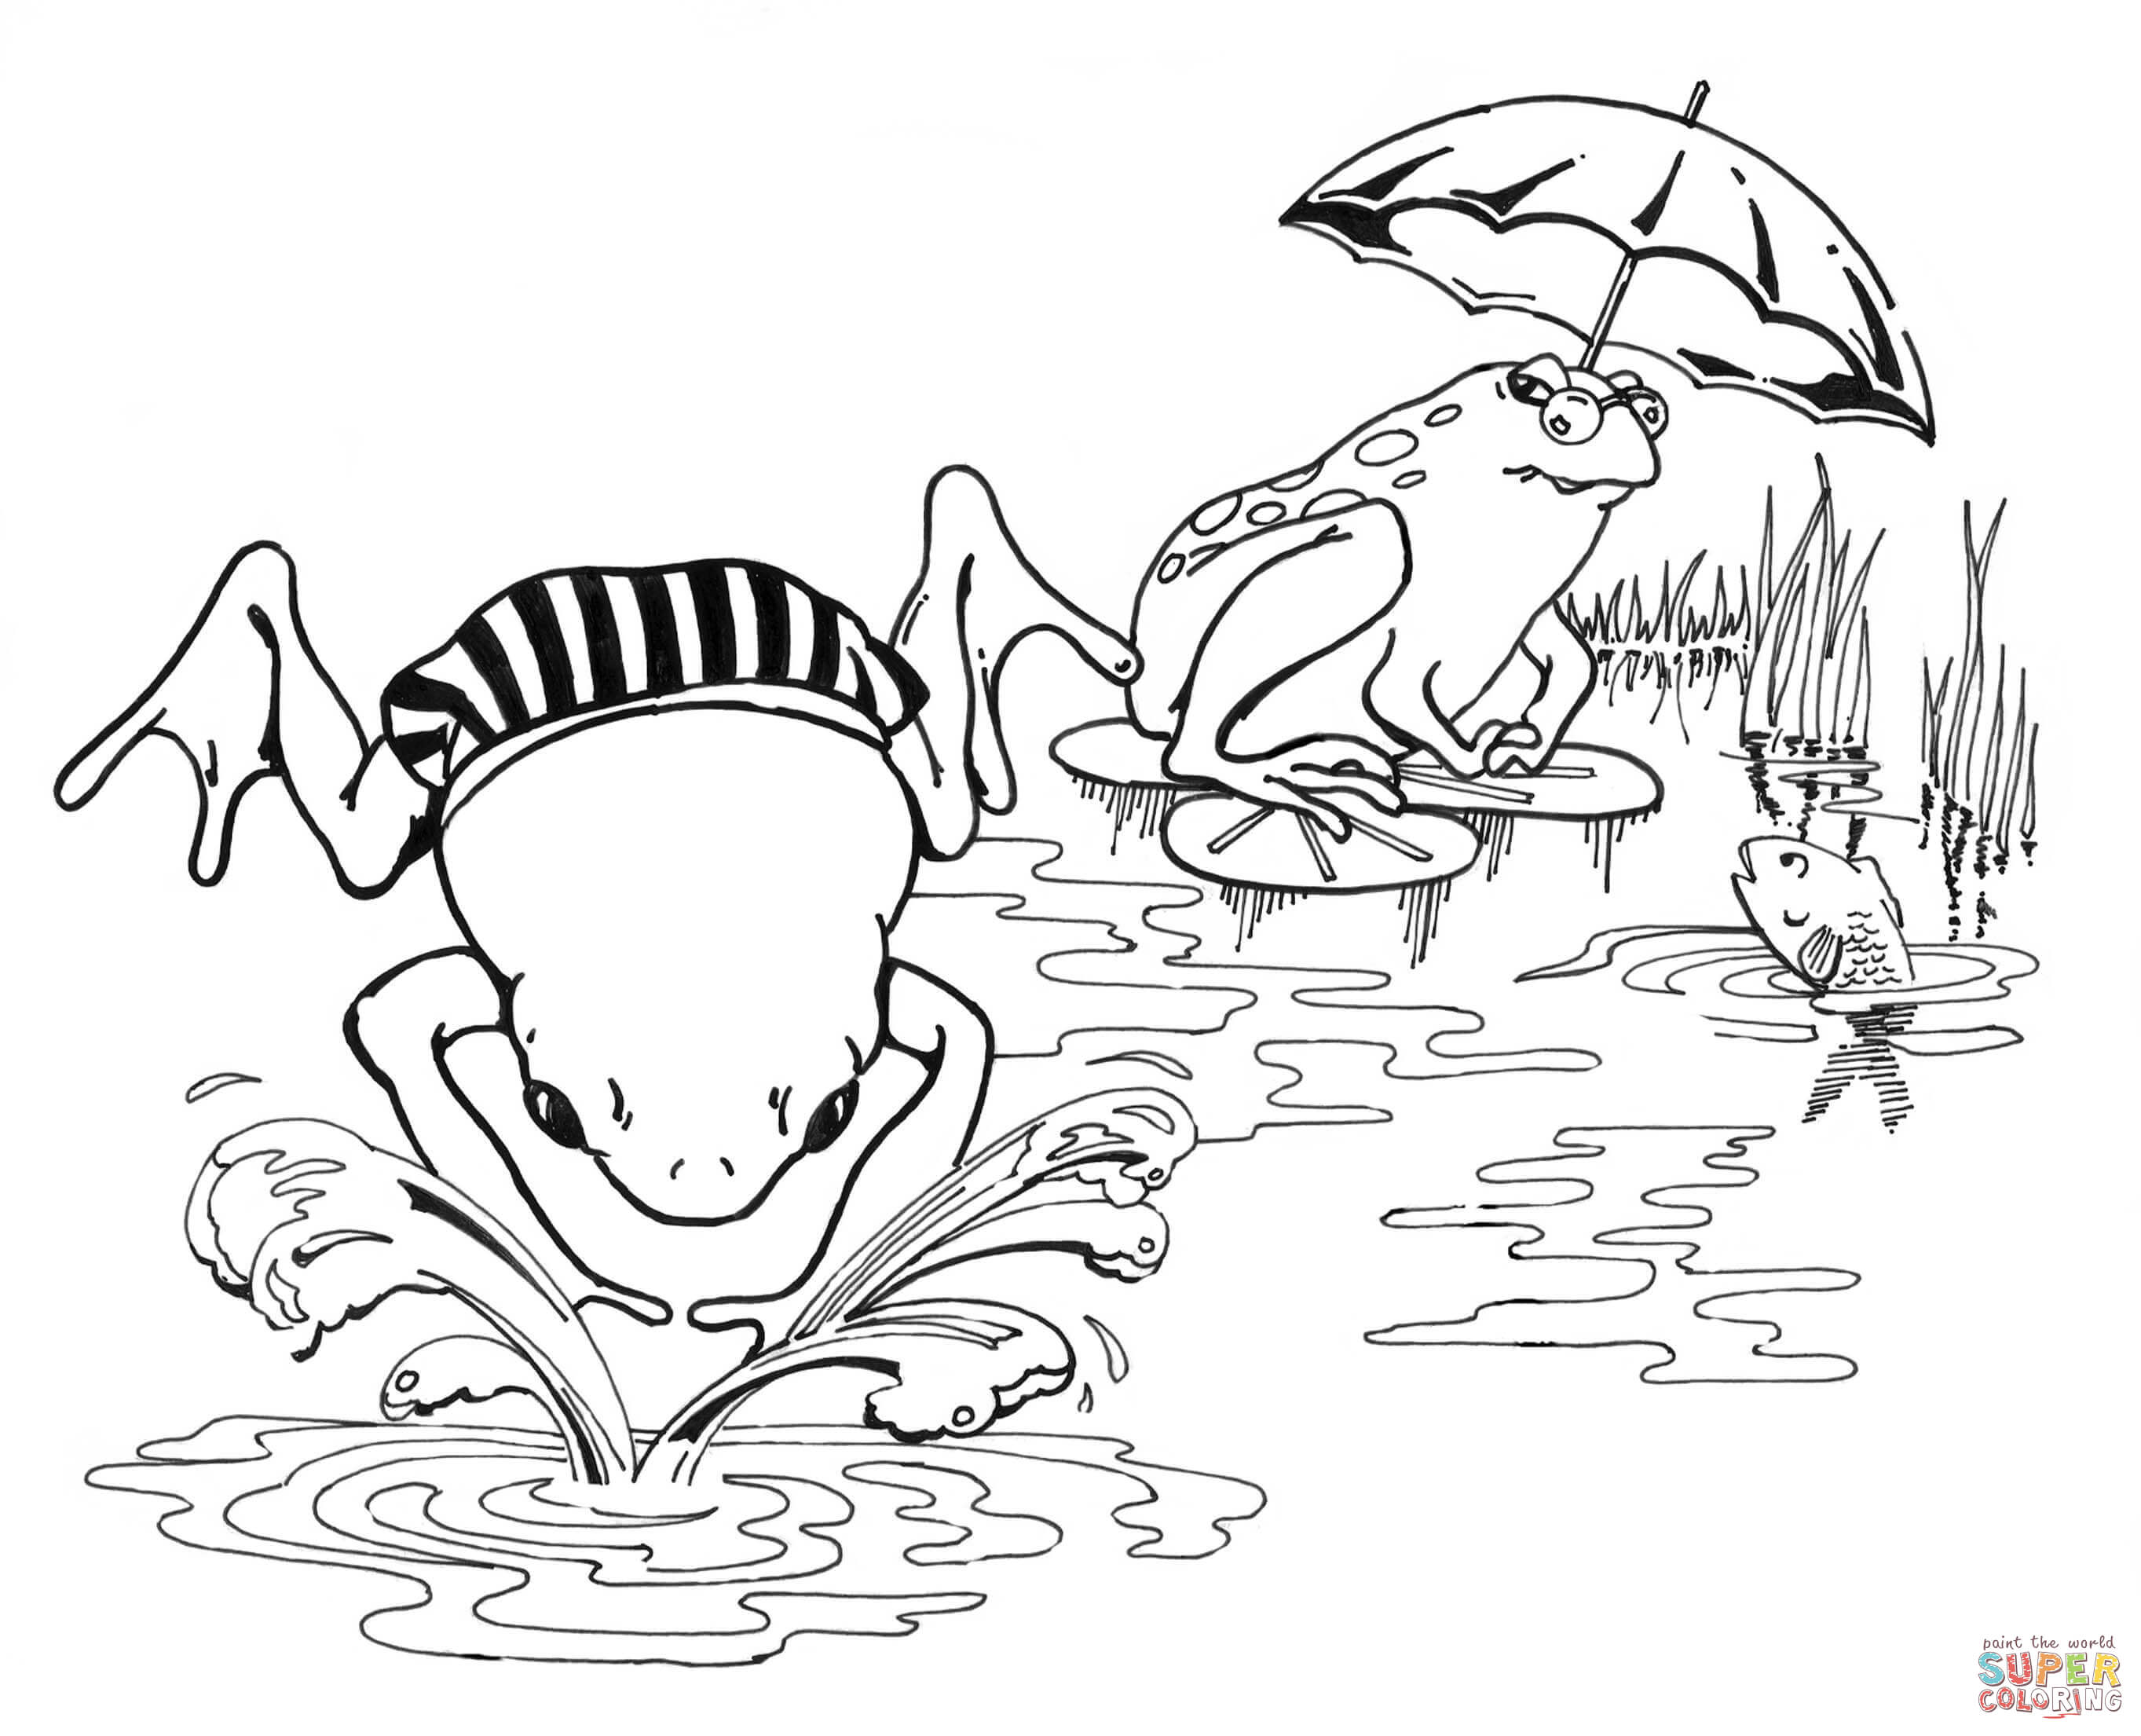 Frogs coloring pages | Free Coloring Pages